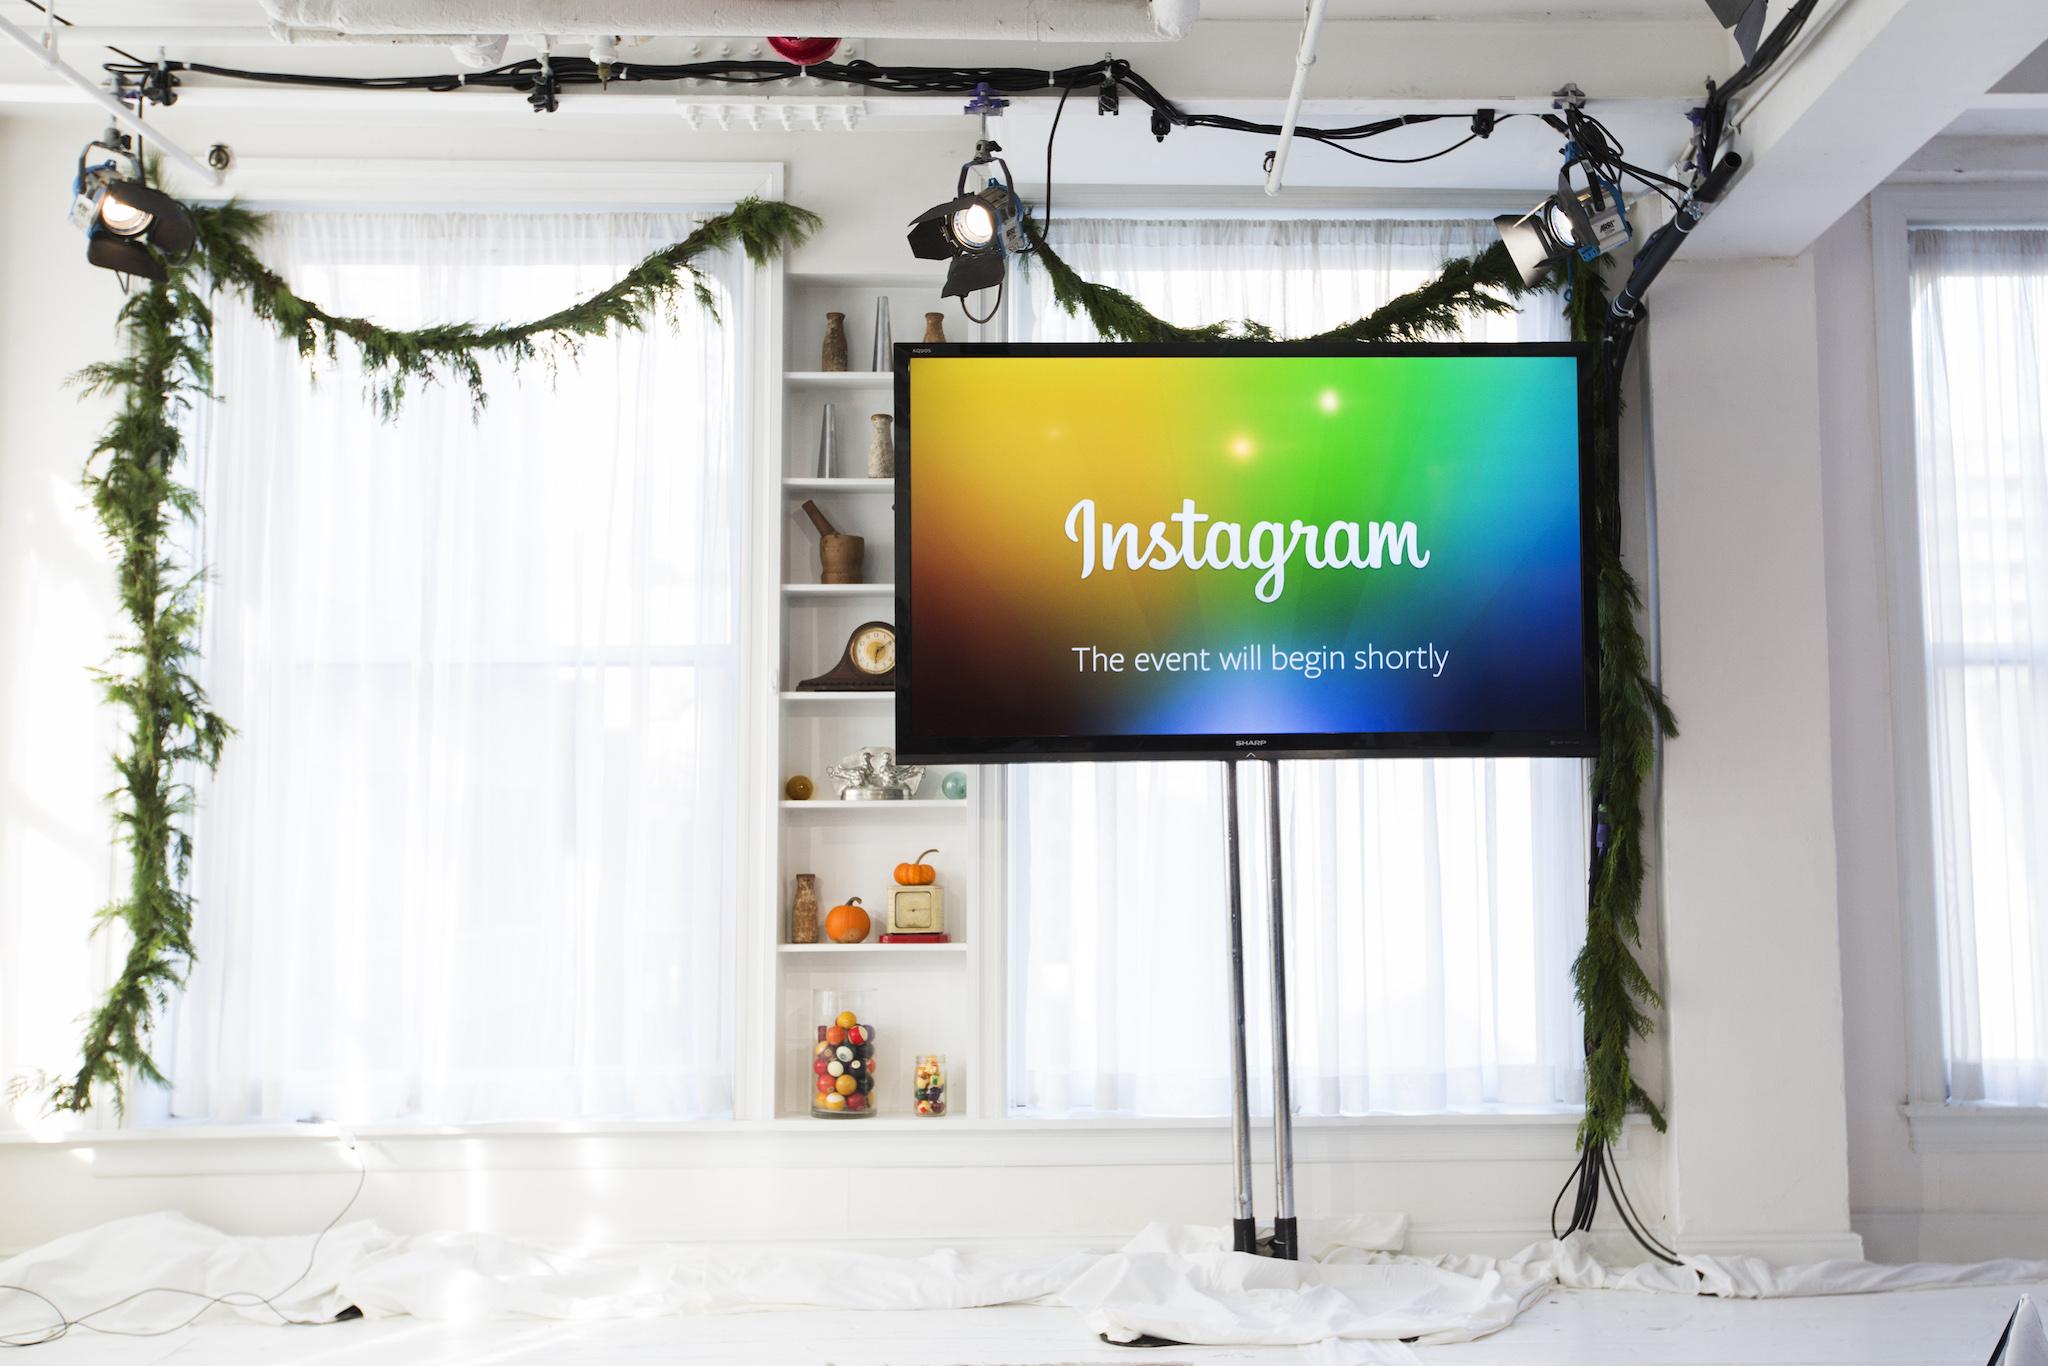 A screen displays a "This event will begin shortly" message before Instagram Chief Executive Officer and co-founder Kevin Systrom announces the launch of a new service named Instagram Direct in New York December 12, 2013